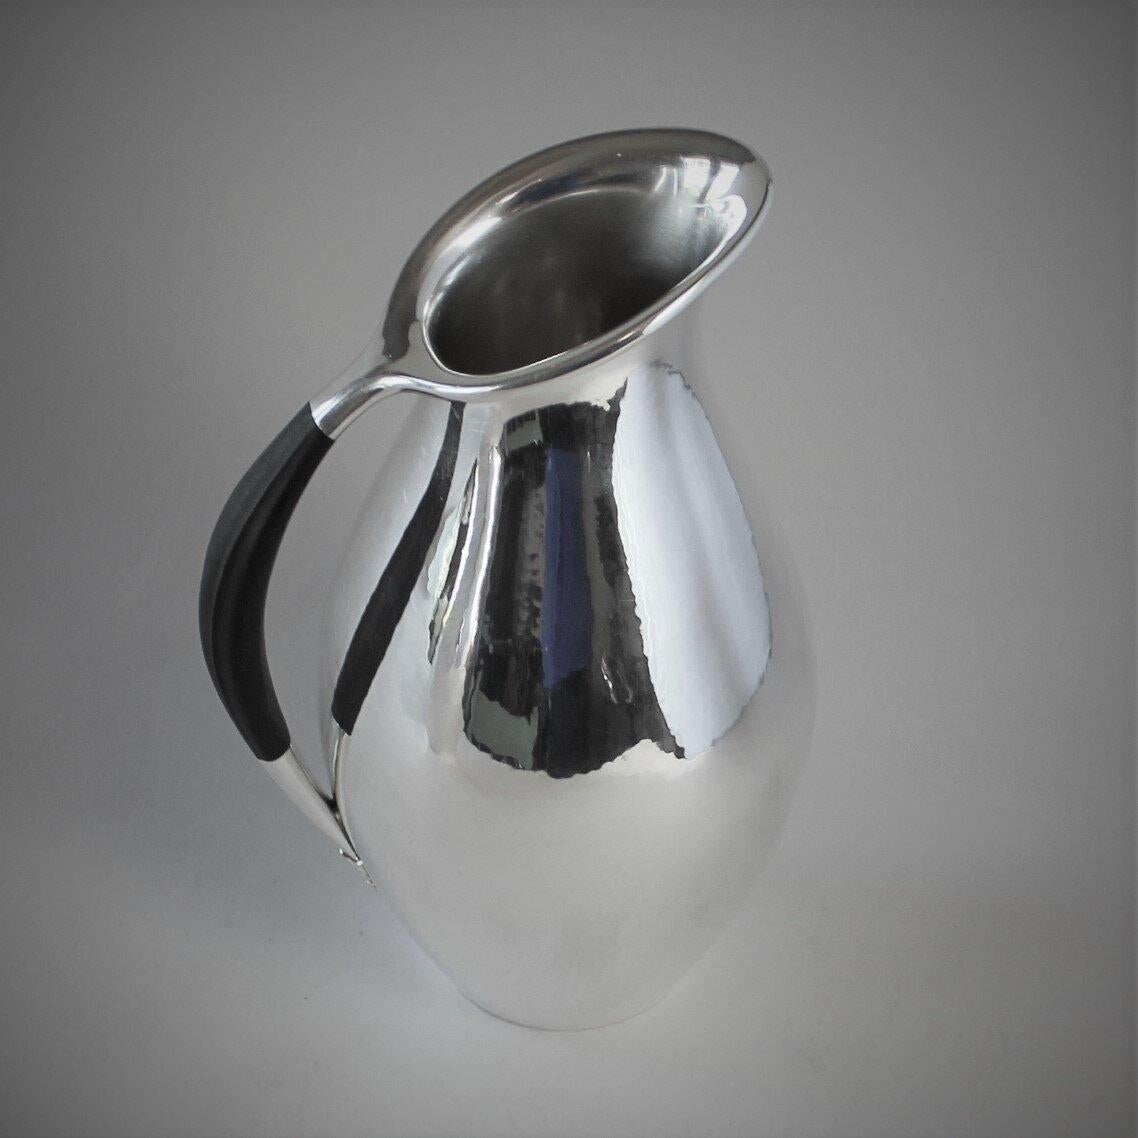 Georg Jensen sterling silver large pitcher with ebony handle, No.432F by Johan Rohde.

Holds 82 ounces.

A similar example can be seen in the book Georg Jensen Holloware, The Silver Fund Collection by David Taylor and Jason Laskey, pg